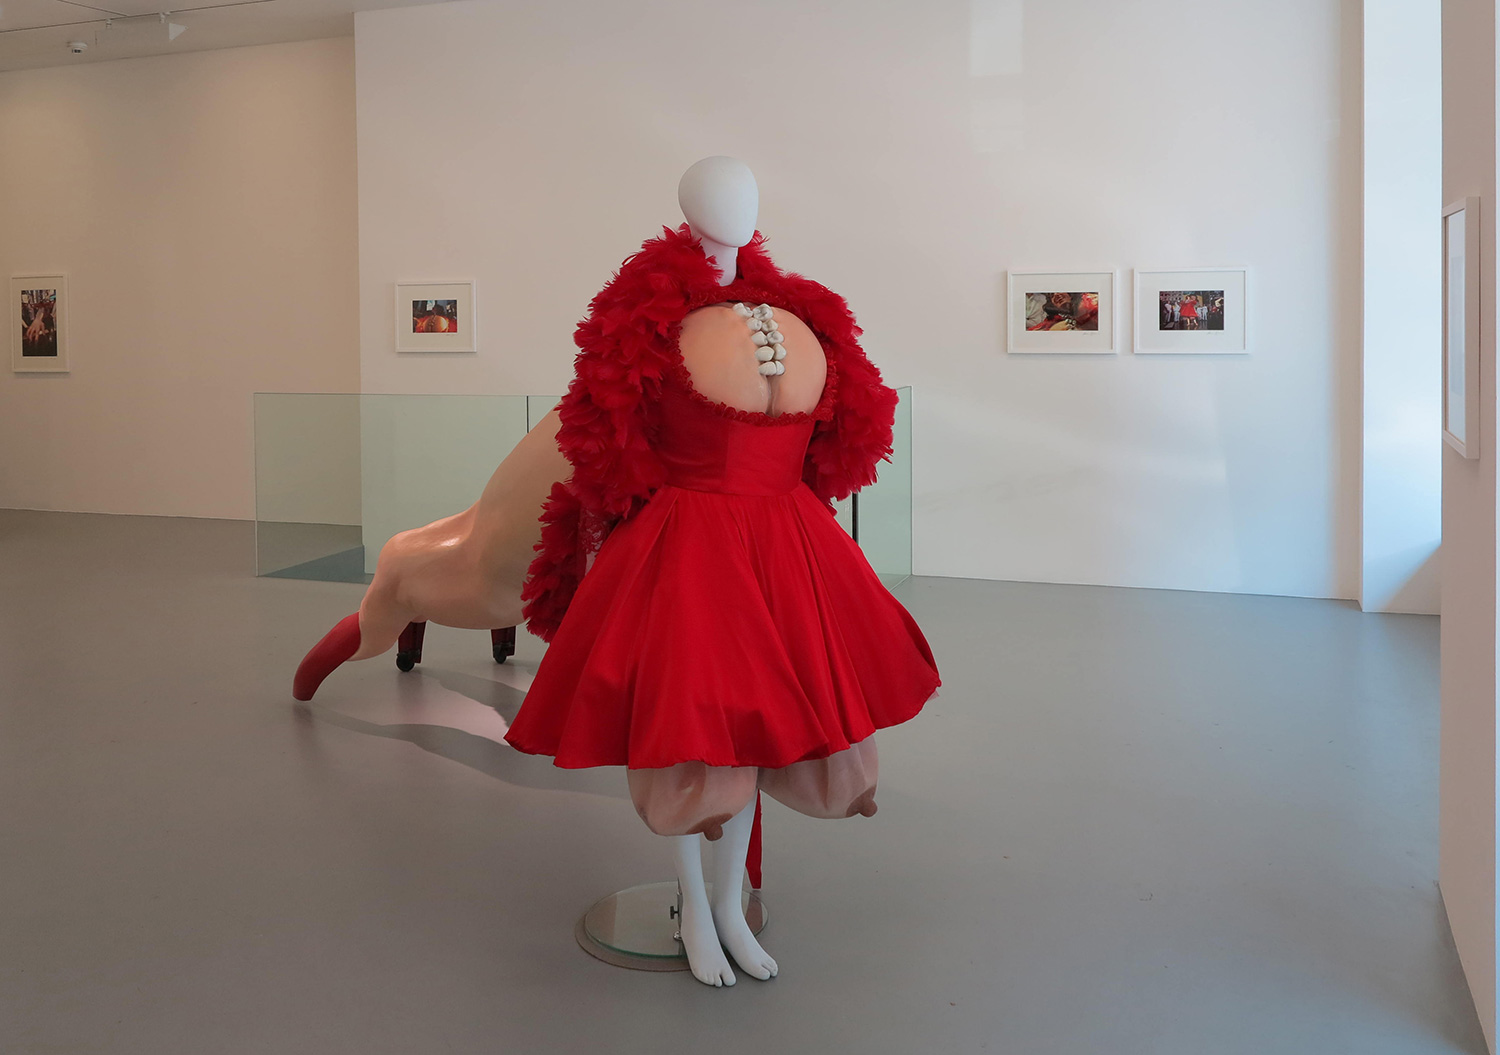 THE MUSETTA SCULPTURE DISPLAYED AT KATZ CONTEMPORARY GALLERY IN ZURICH